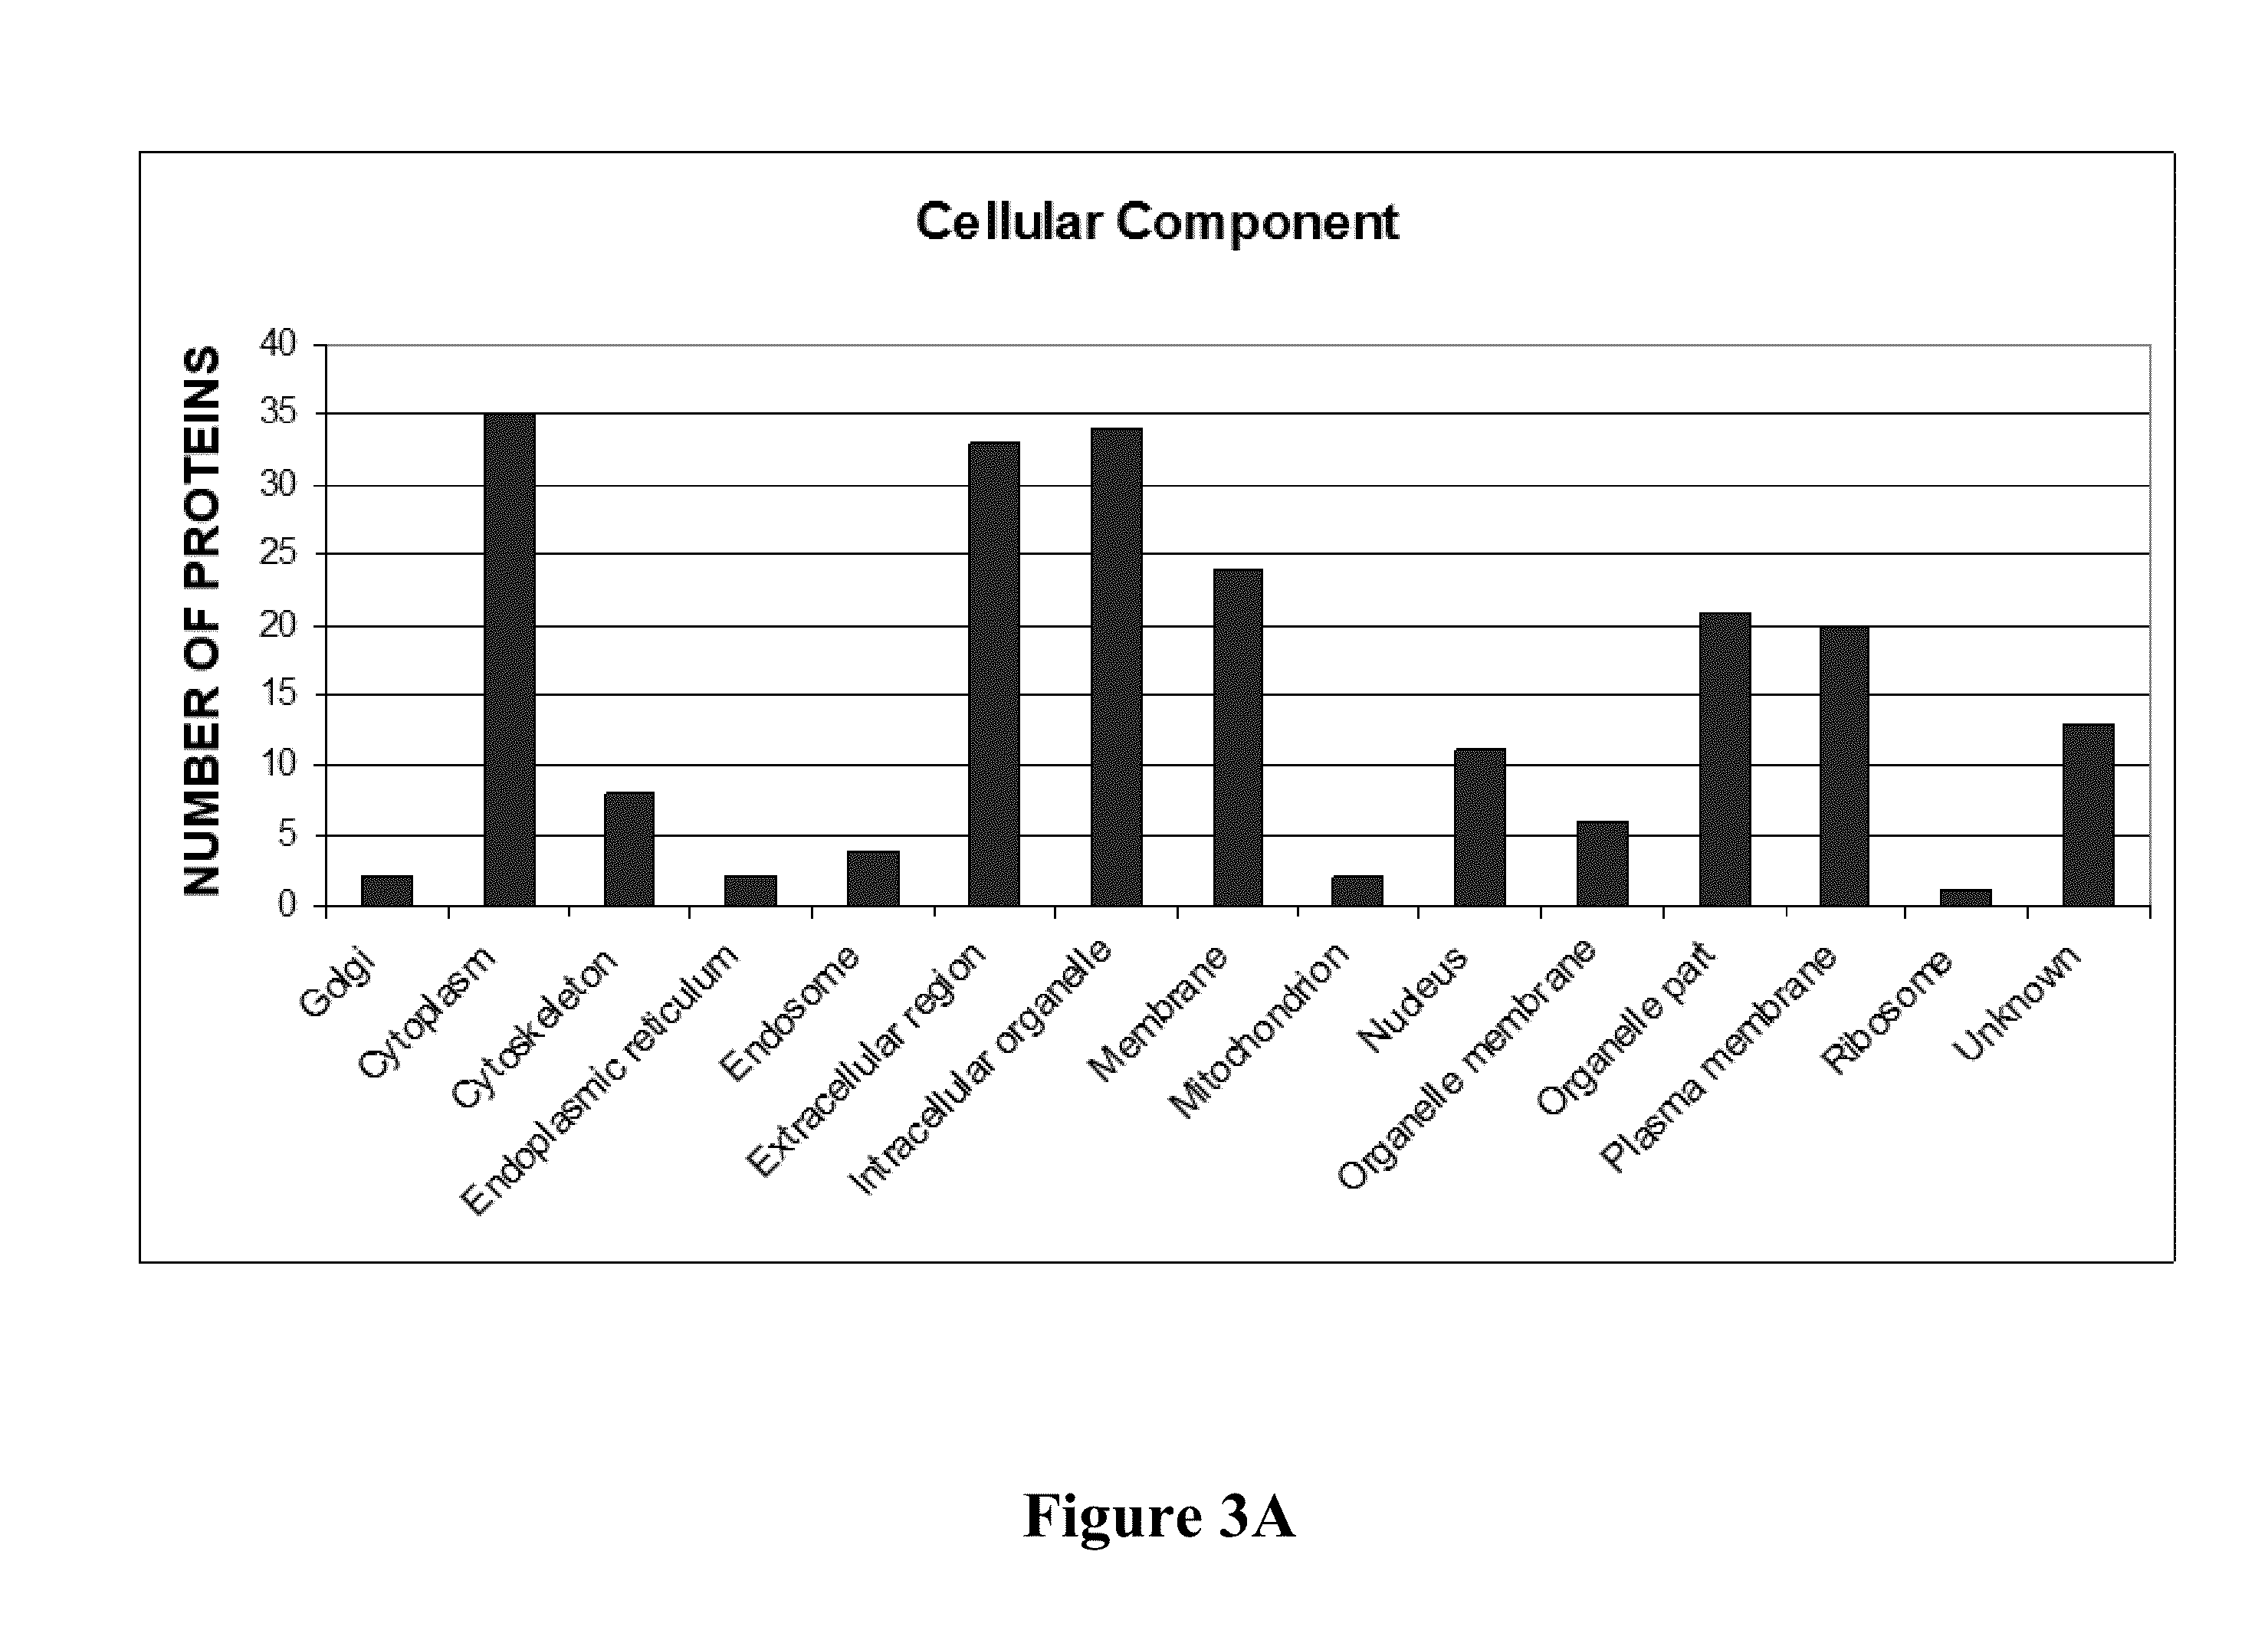 Method of cancer diagnosis, progression and response to therapy using a primary xenograft mouse model for cancer serum biomarker discovery